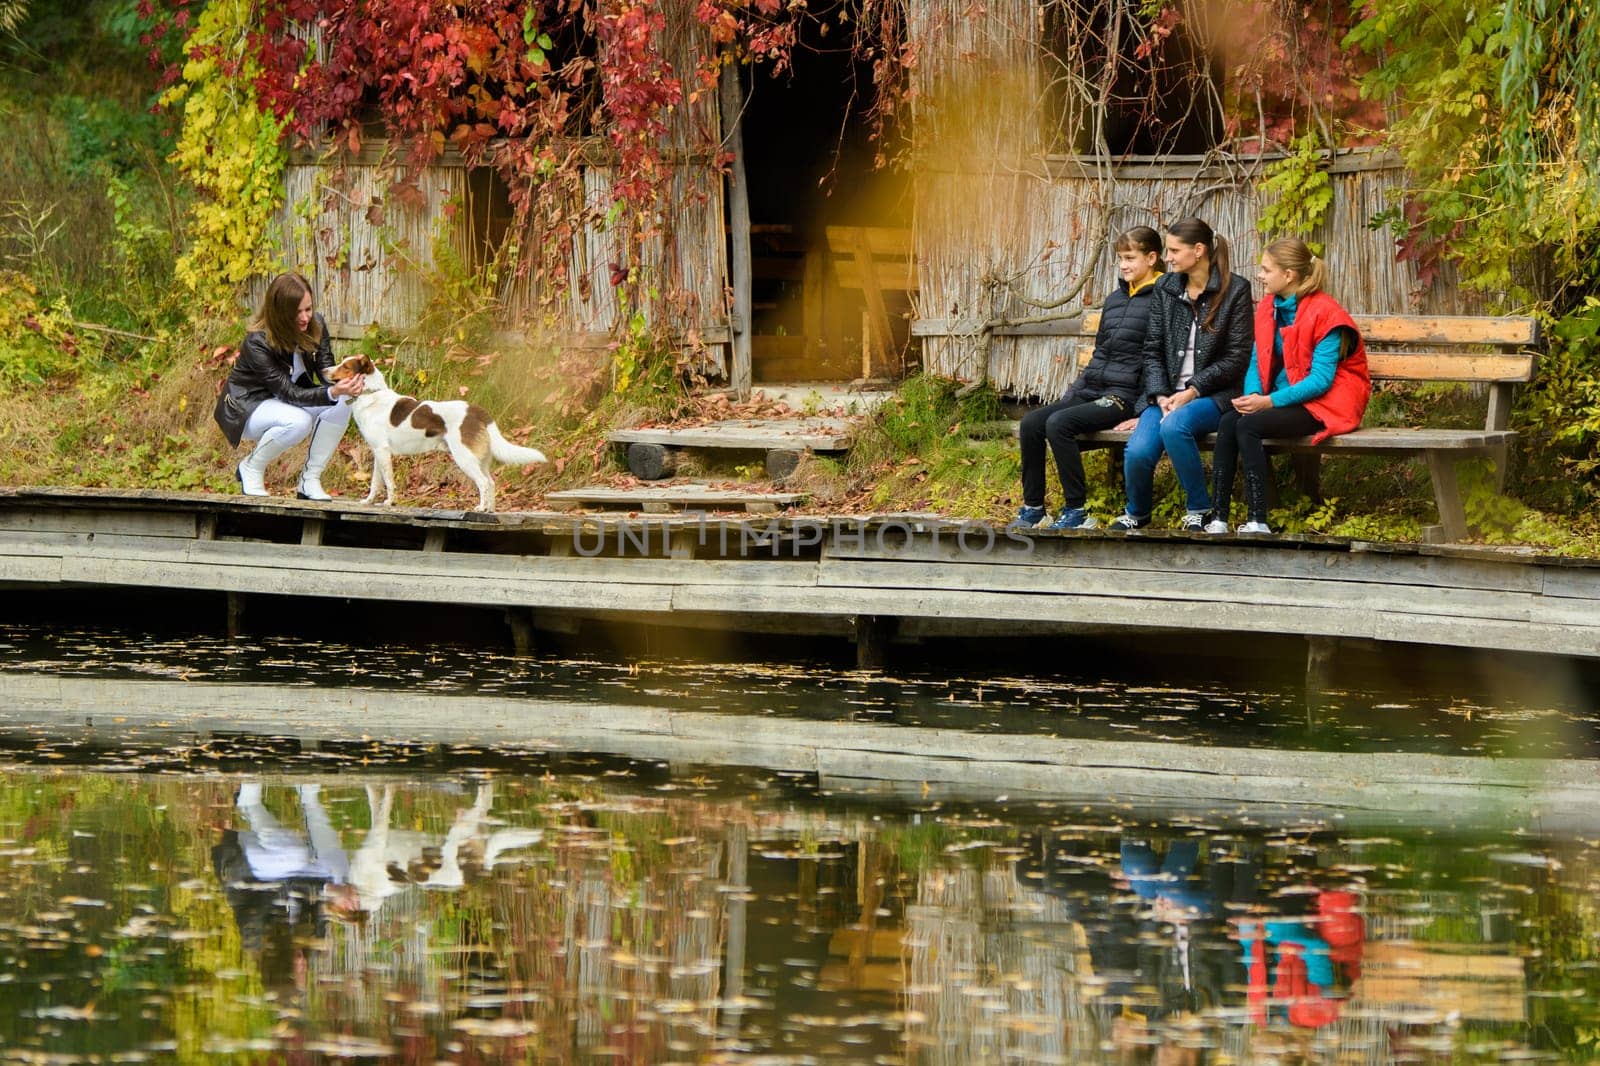 A young beautiful girl strokes a dog by the lake in an autumn park, a girl and two teenage girls are sitting next to her on a bench. by Madhourse